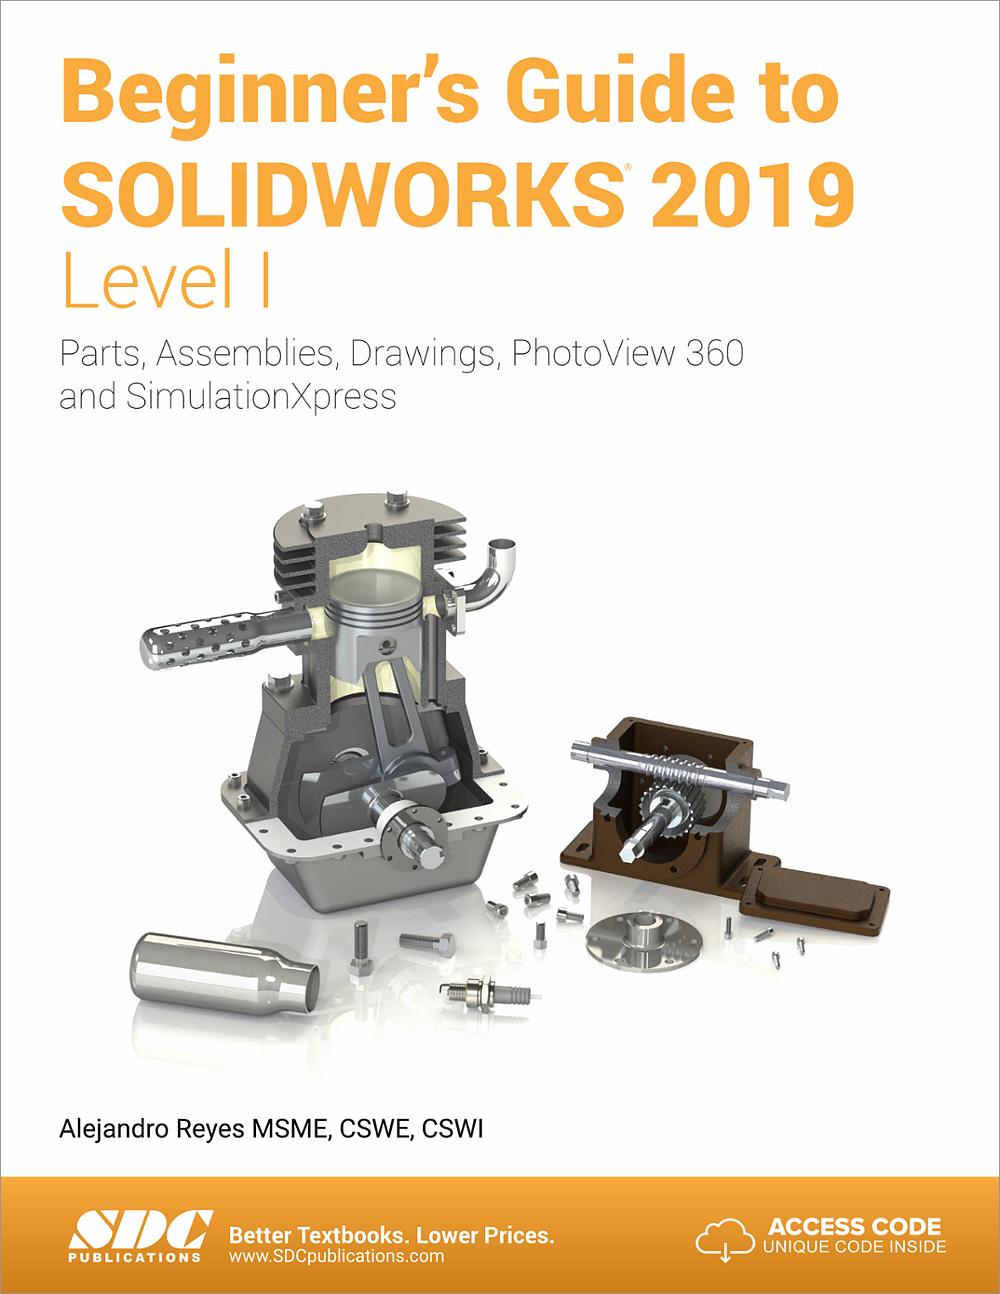 solidworks 2019 student edition download for the class